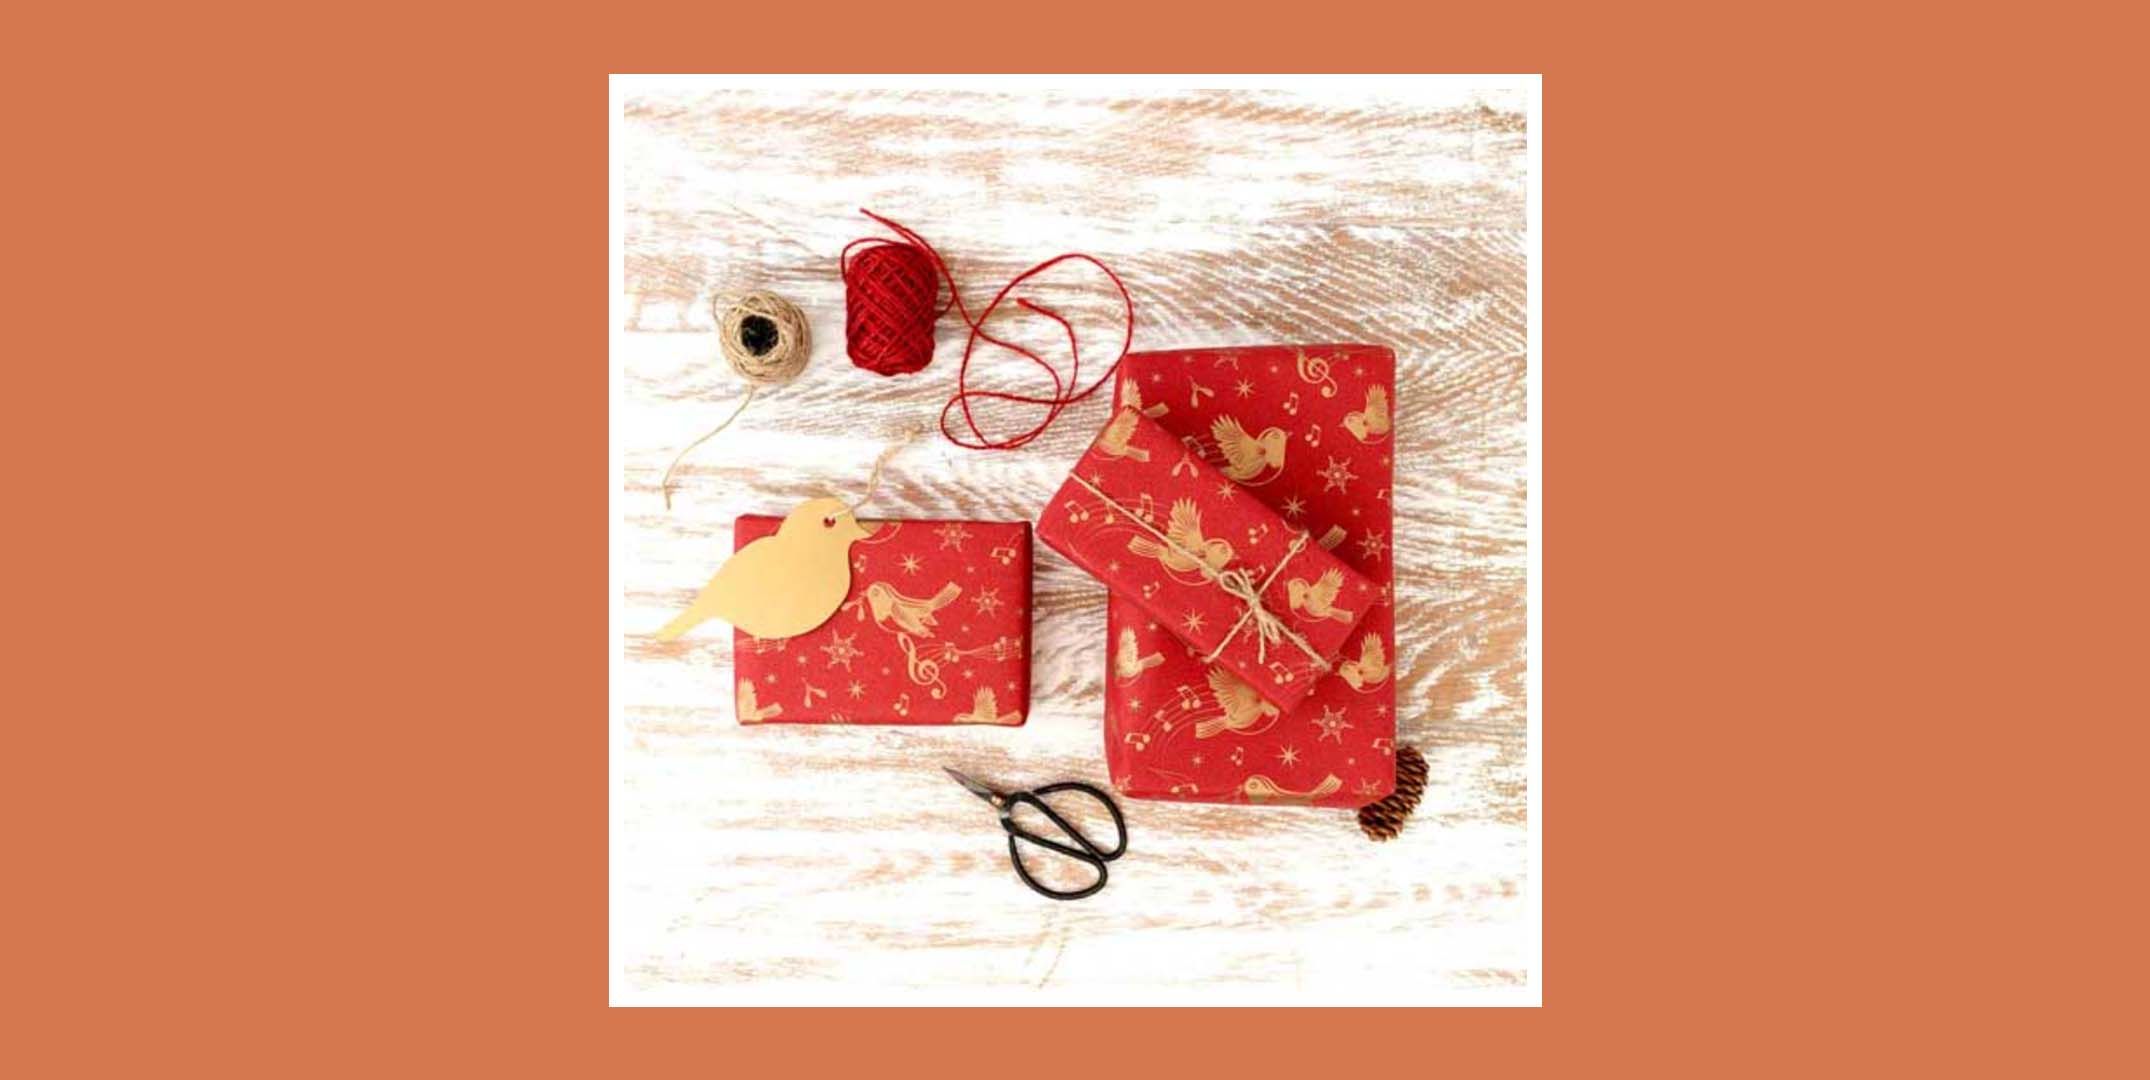 Christmas Red Green Gold Wrapping Paper Sheets, Gift Wrapping Paper,eco  Friendly Kraft Paper,100% Recycled & Recyclable, Luxury Gift Wrap 